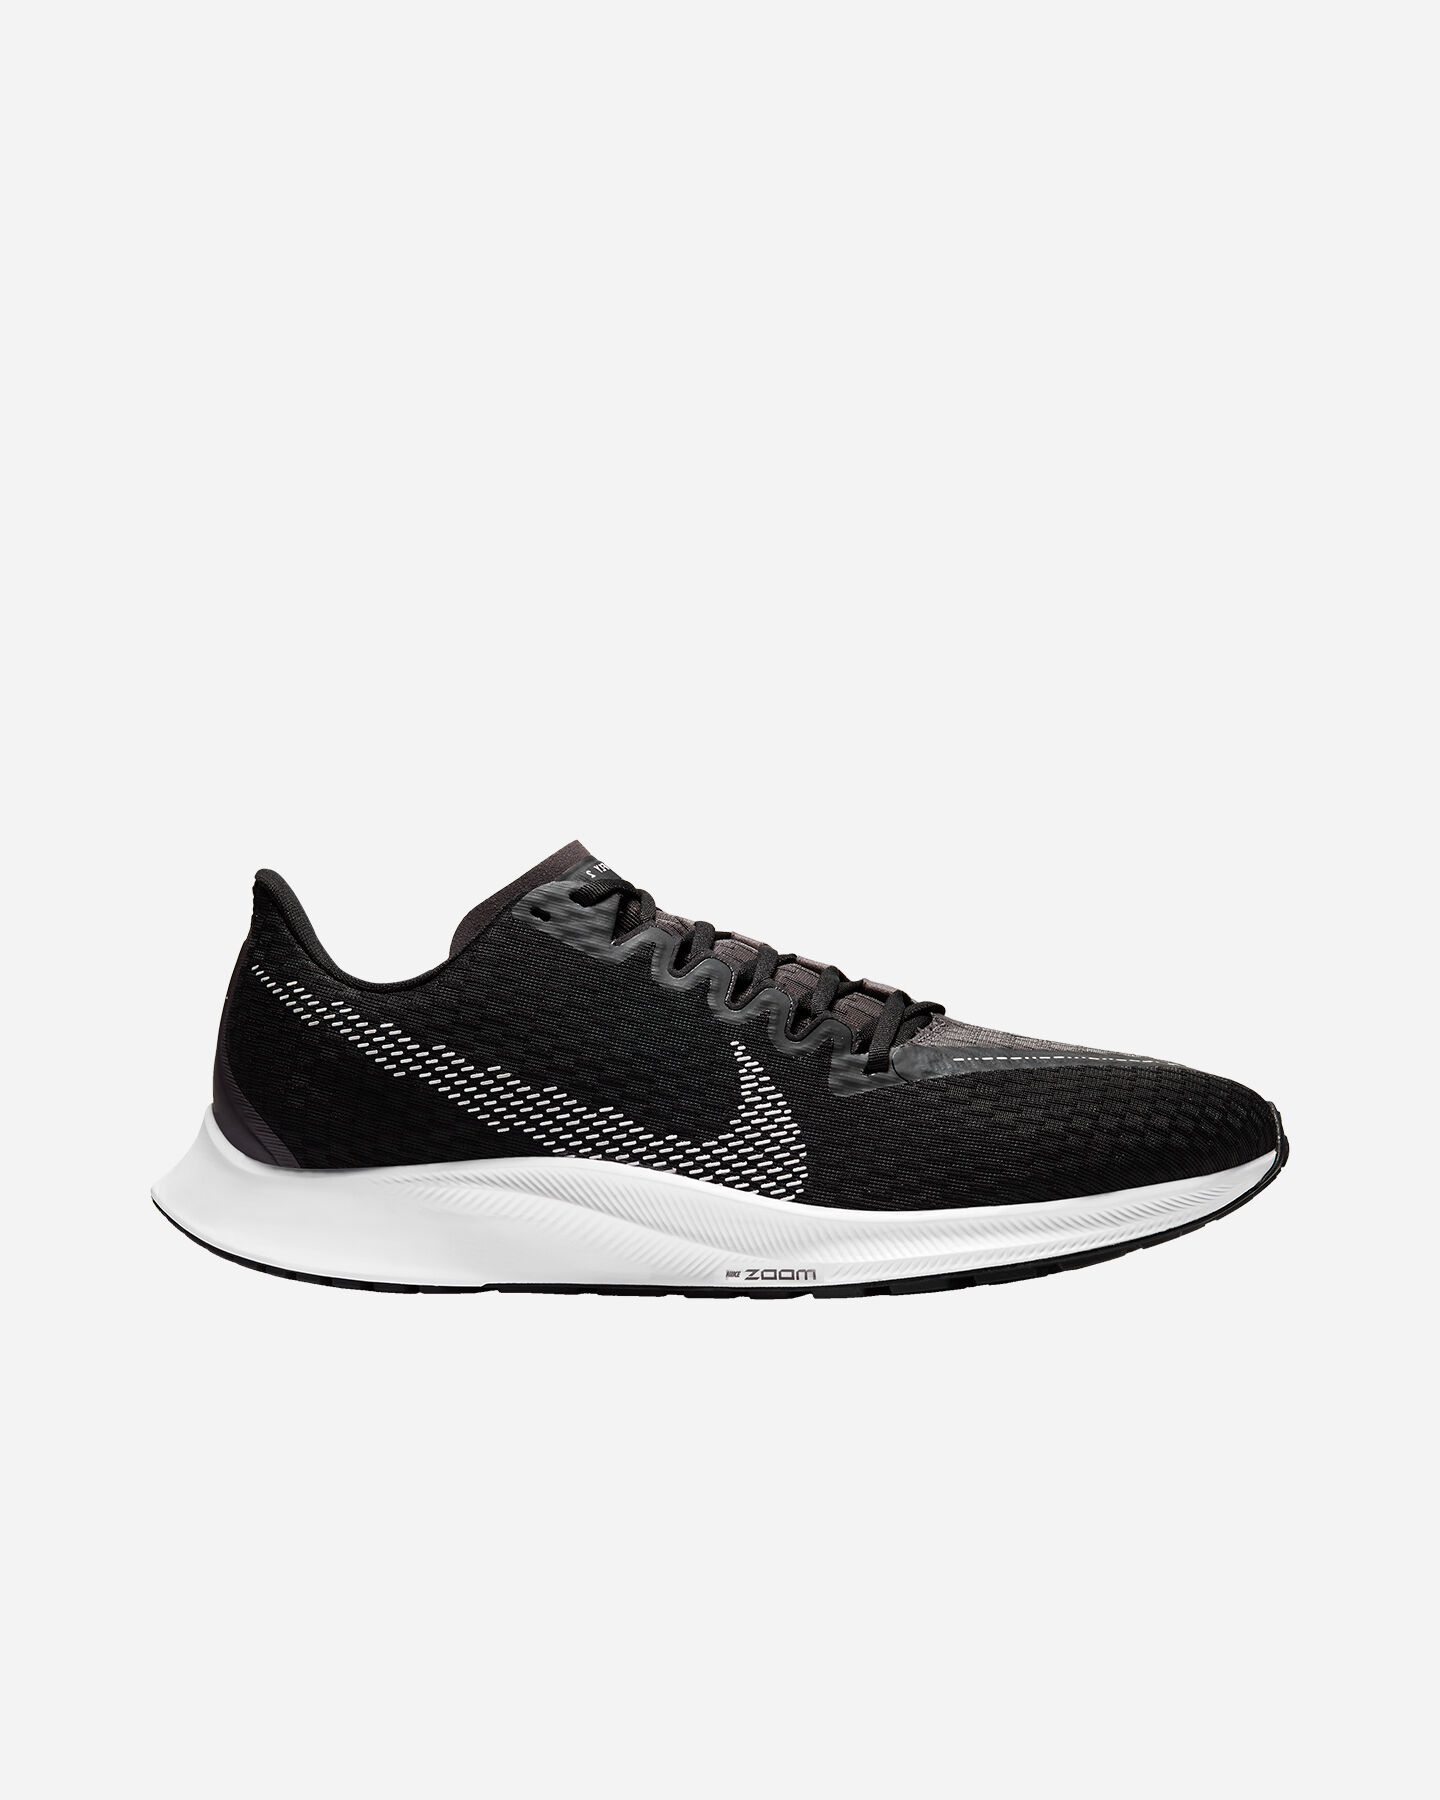  Scarpe running NIKE ZOOM RIVAL FLY 2 M S5306522|001|6 scatto 0